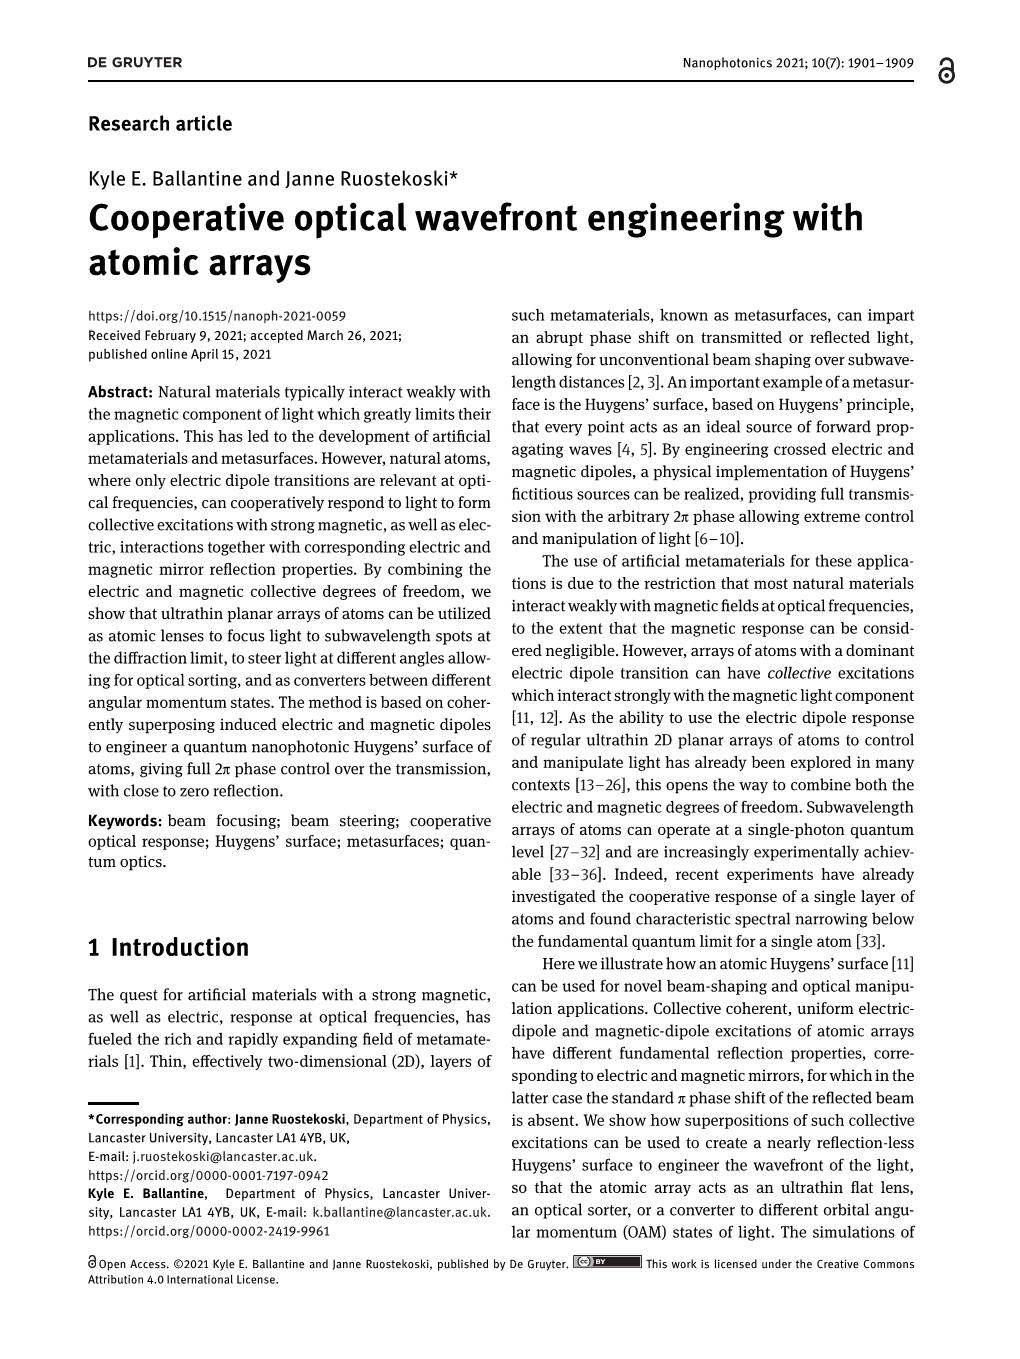 Cooperative Optical Wavefront Engineering with Atomic Arrays